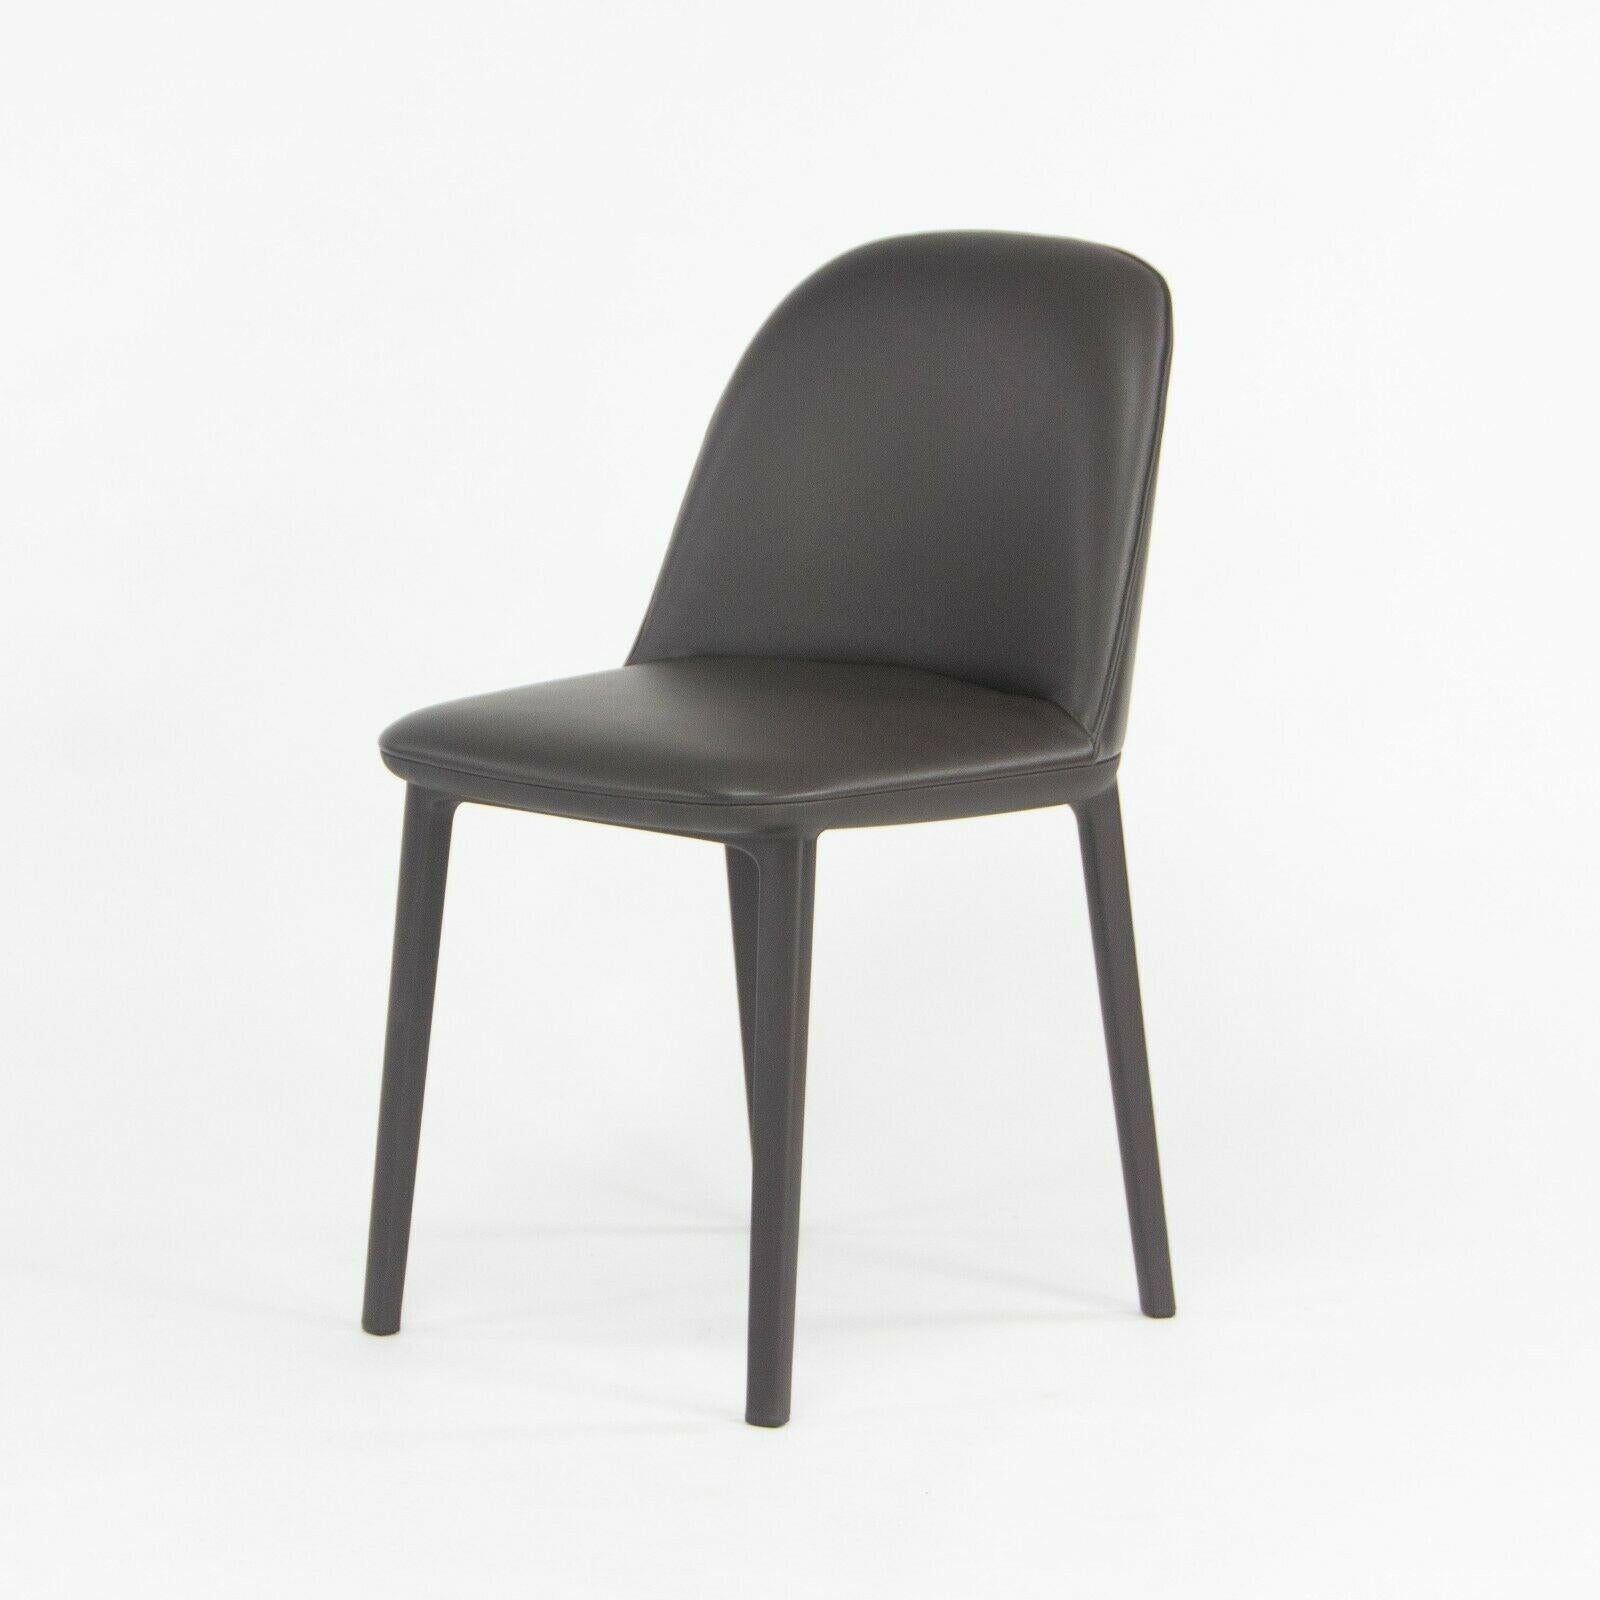 Modern 2019 Vitra Softshell Side Chair w Dark Brown Leather by Ronan & Erwan Bouroullec For Sale